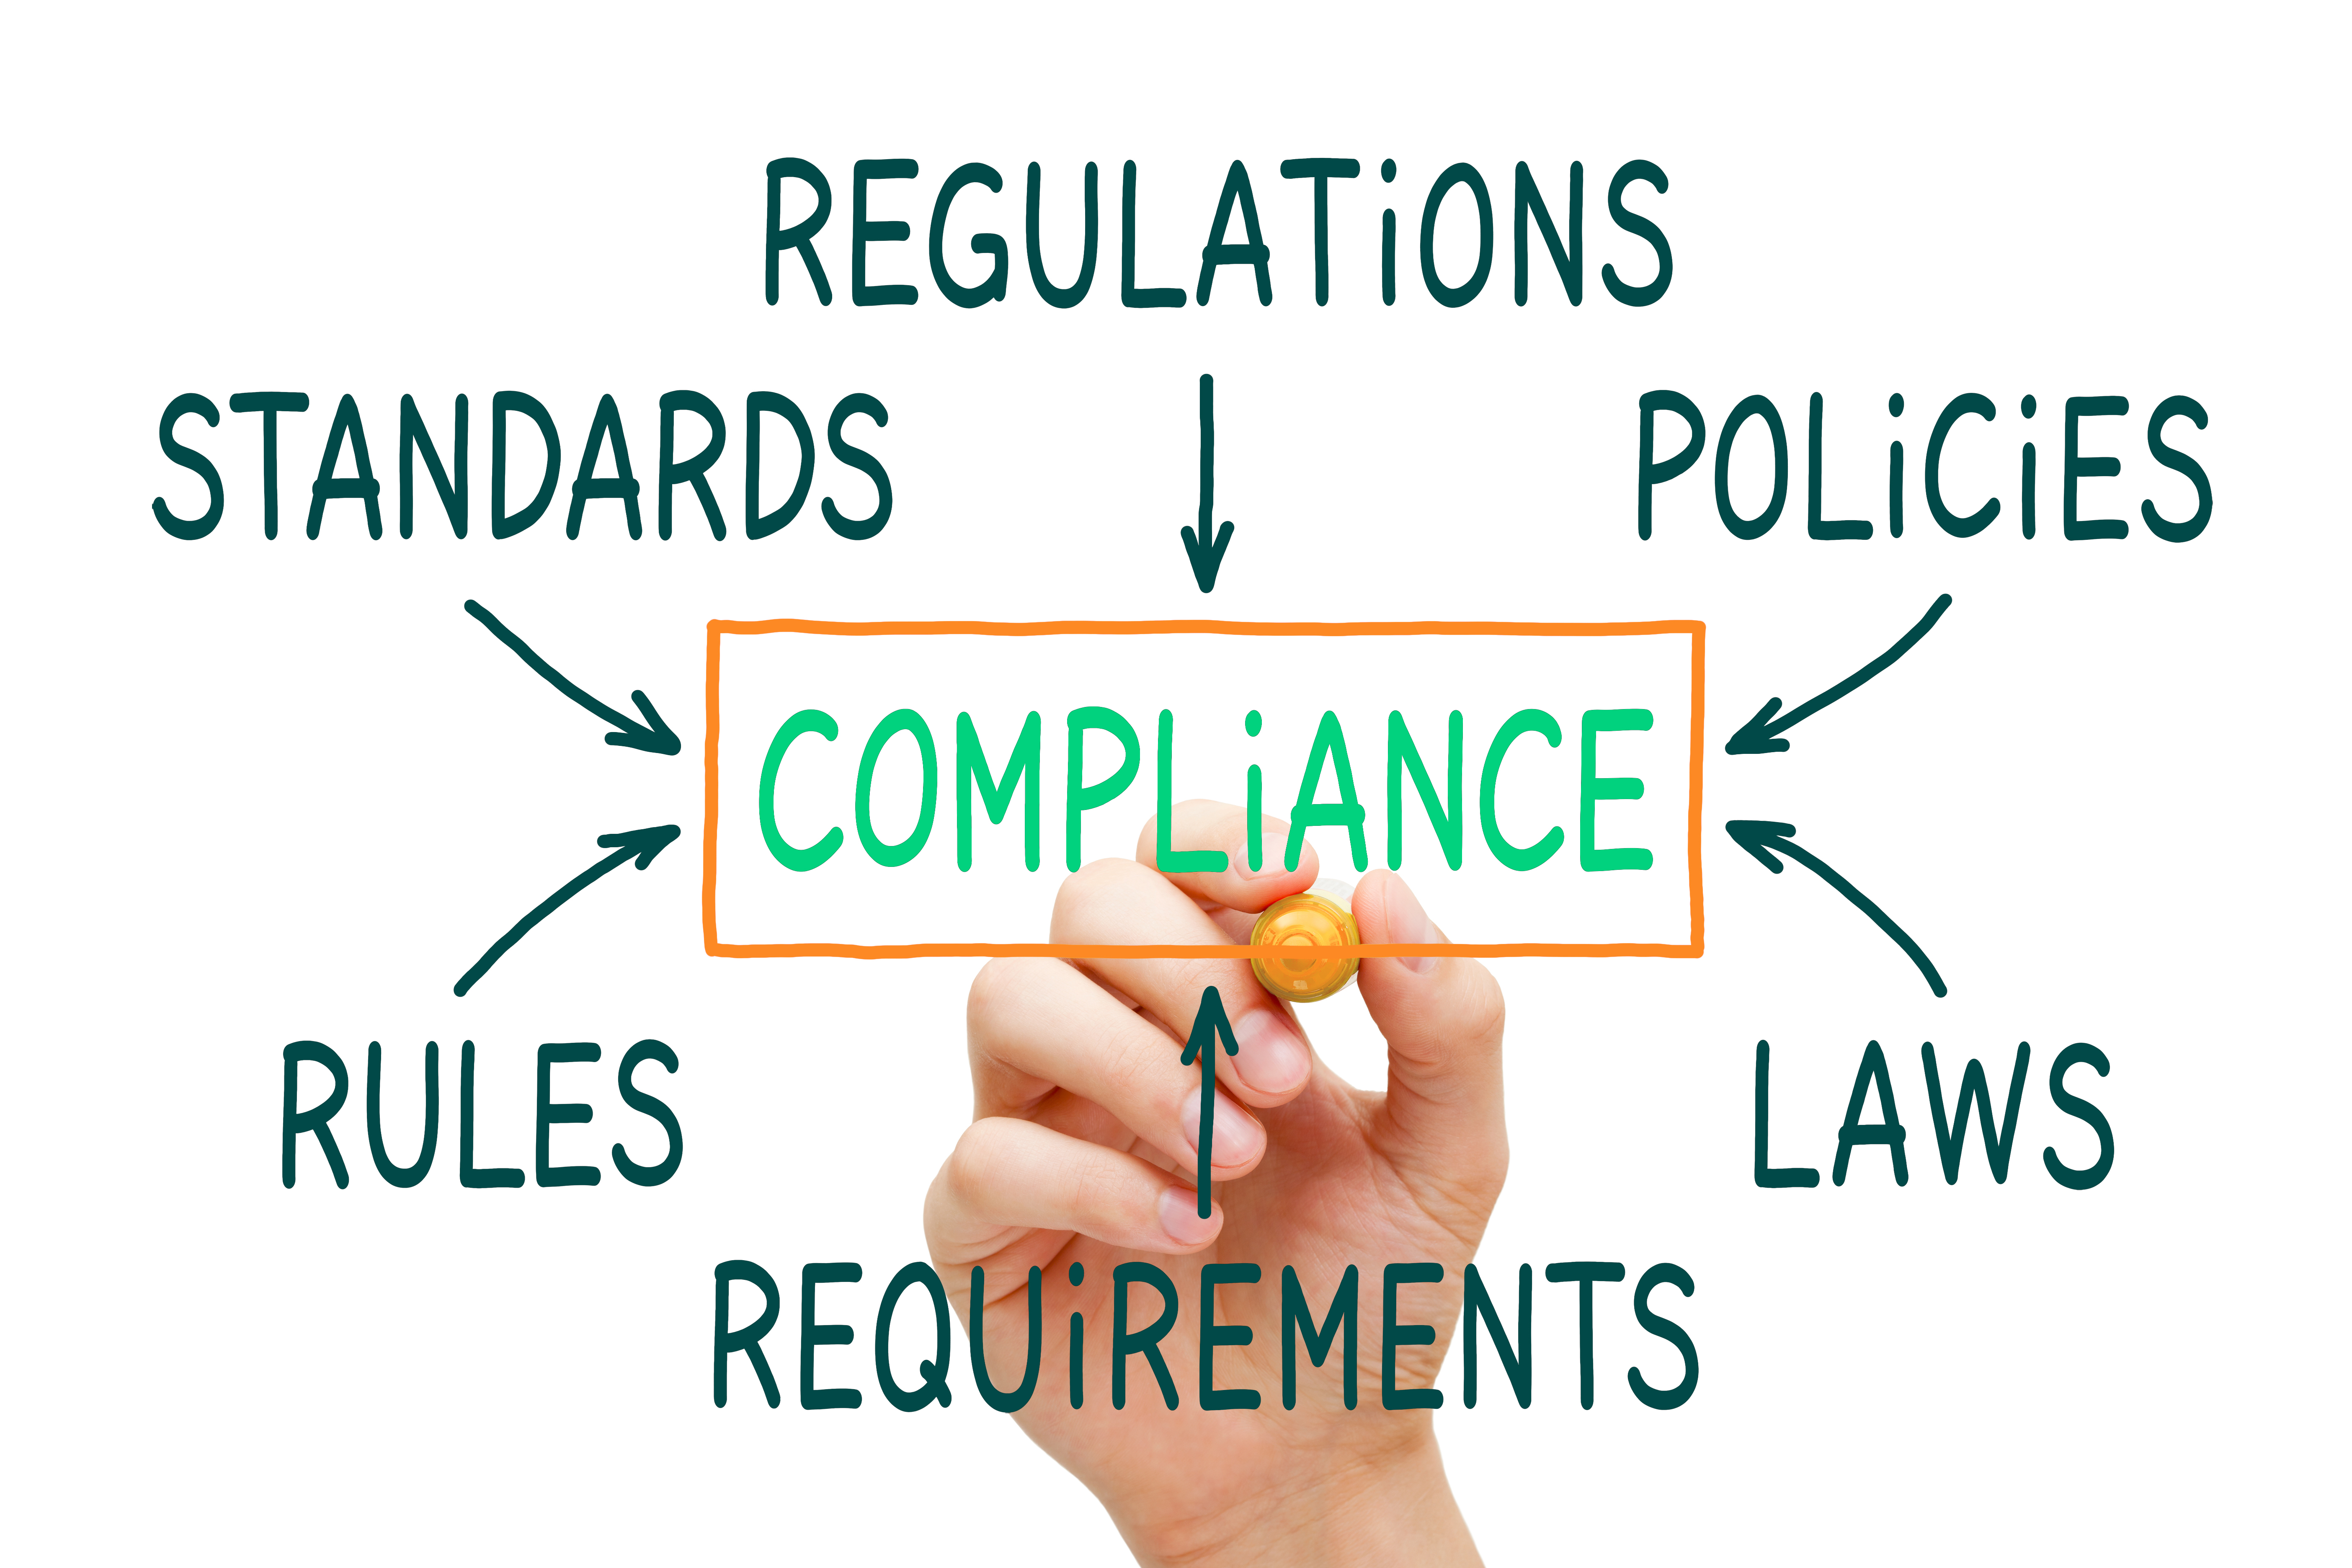 The image shows a compliance Figure with words around the word compliance and a hand writing the words